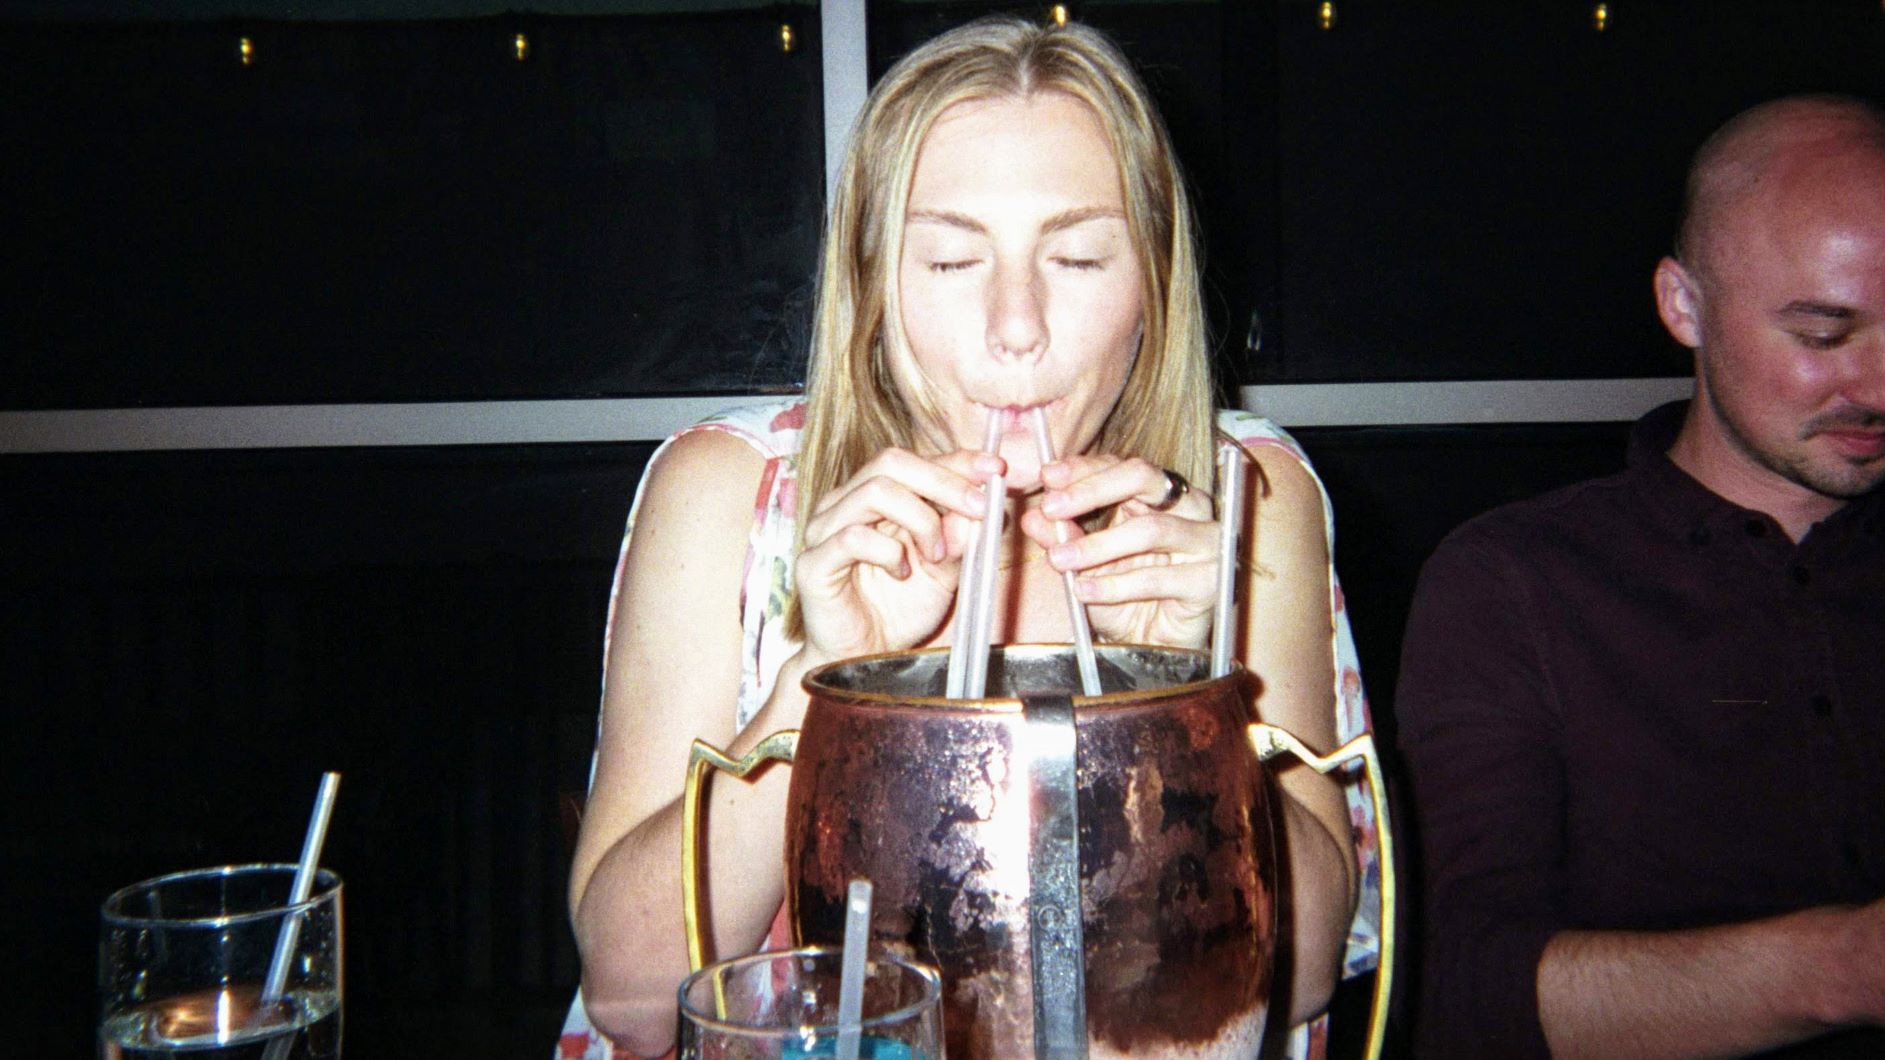 allyson drinking a moscow mule taken with a disposable camera